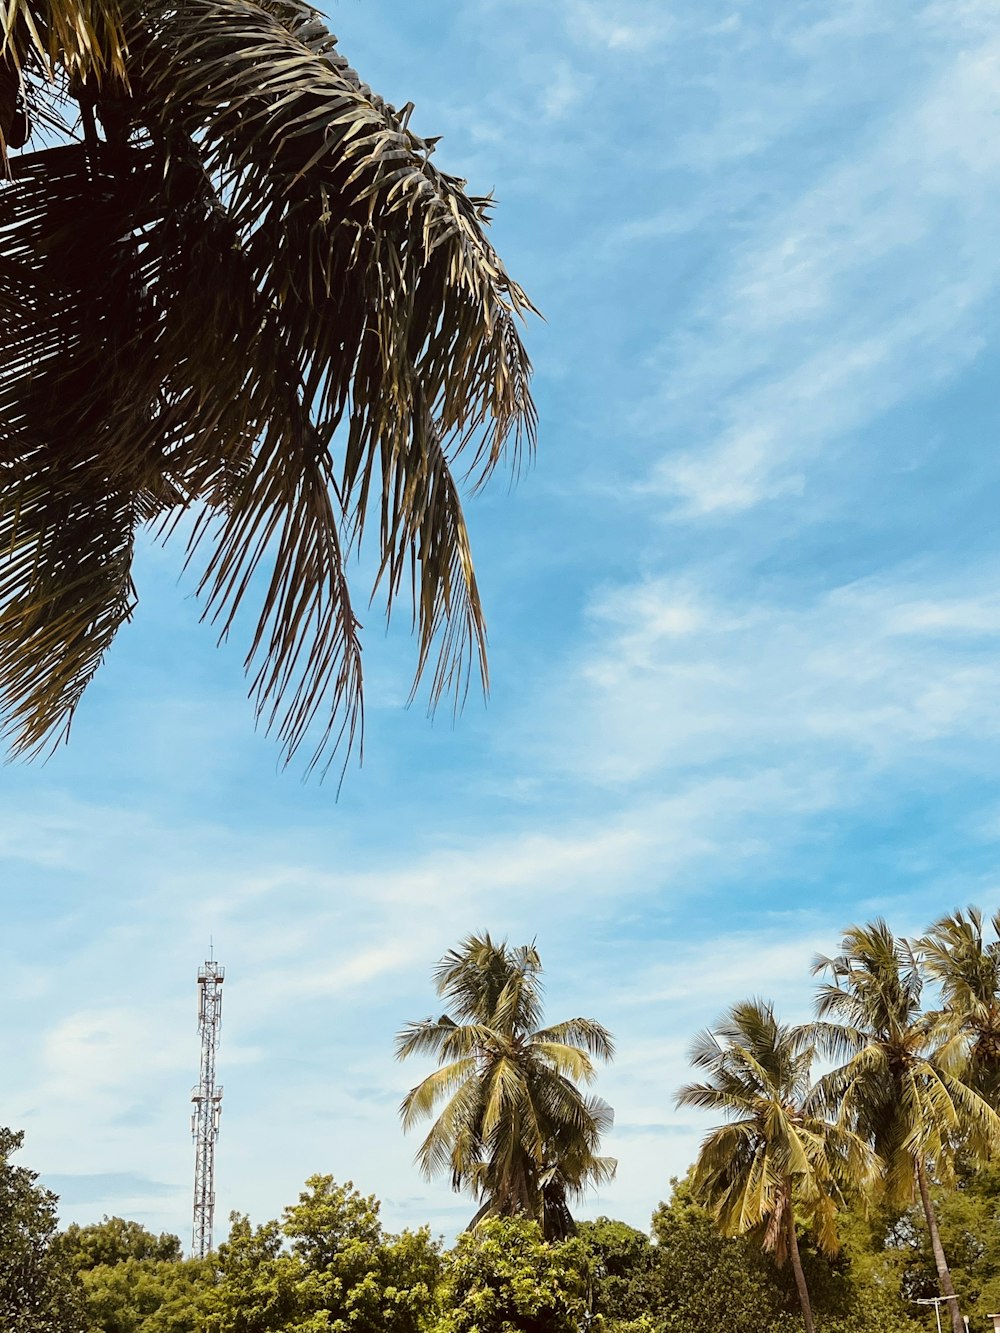 a palm tree and a radio tower in the background